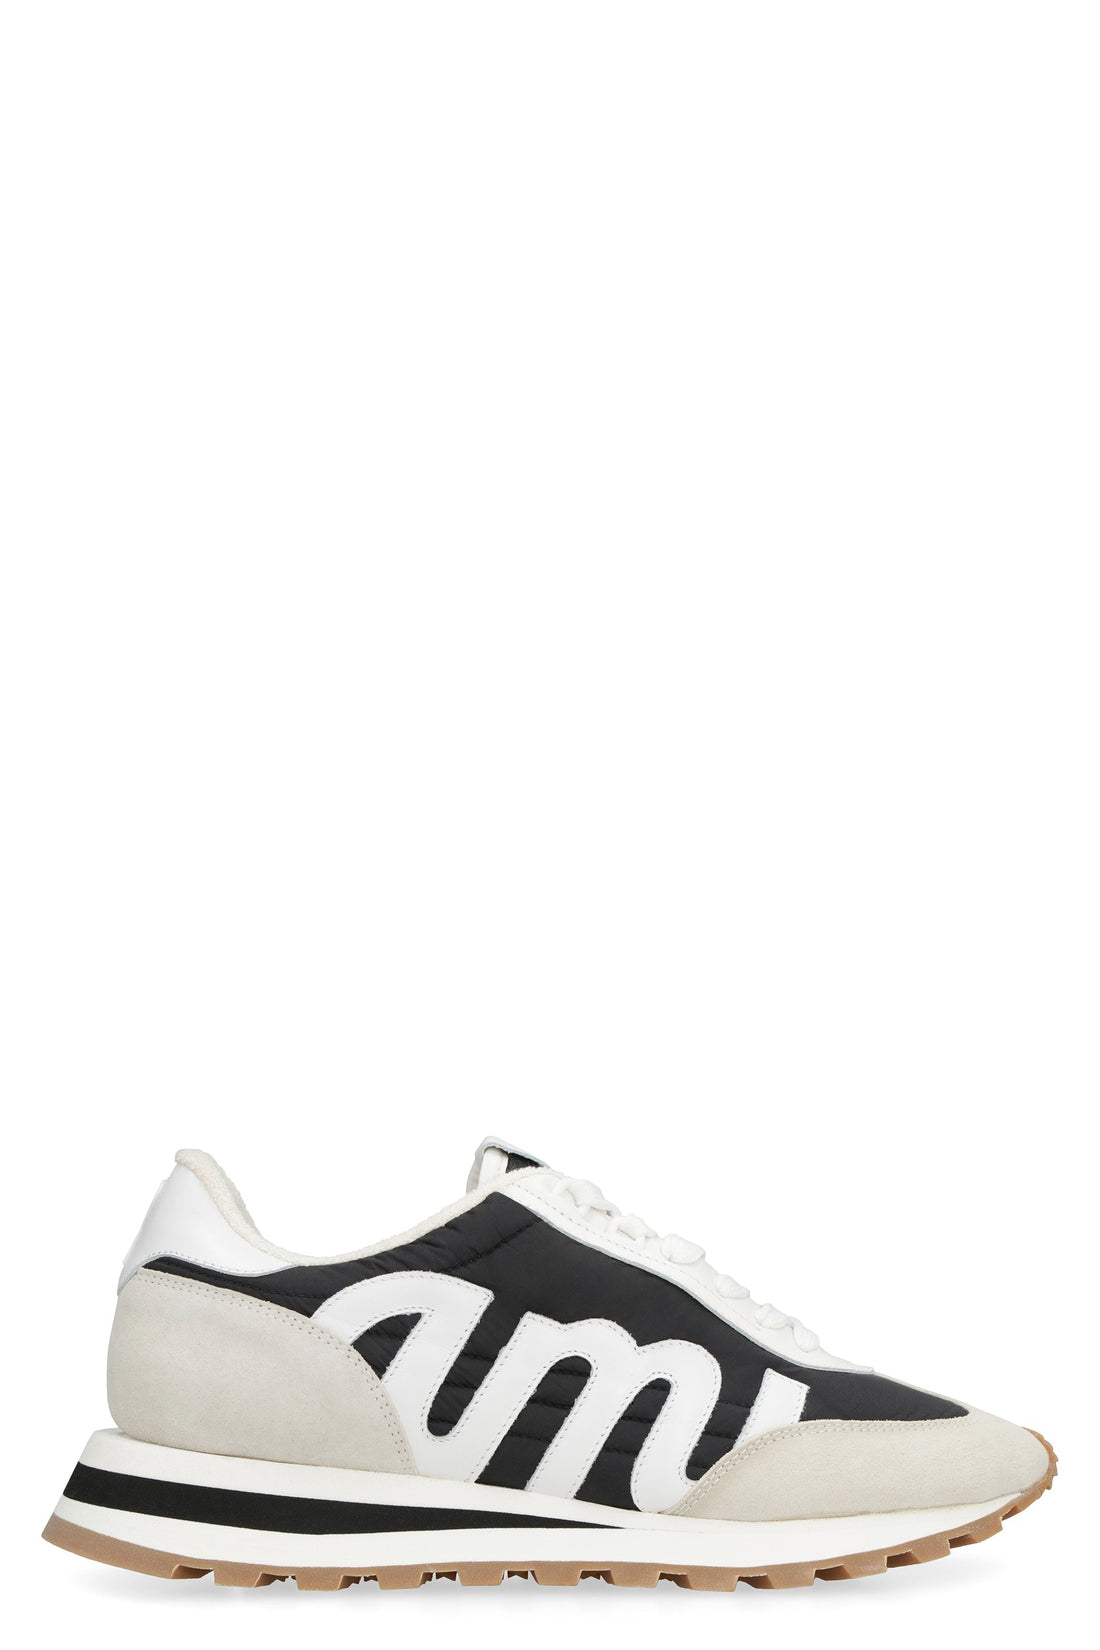 AMI PARIS-OUTLET-SALE-Ami Rush leather and fabric low-top sneakers-ARCHIVIST